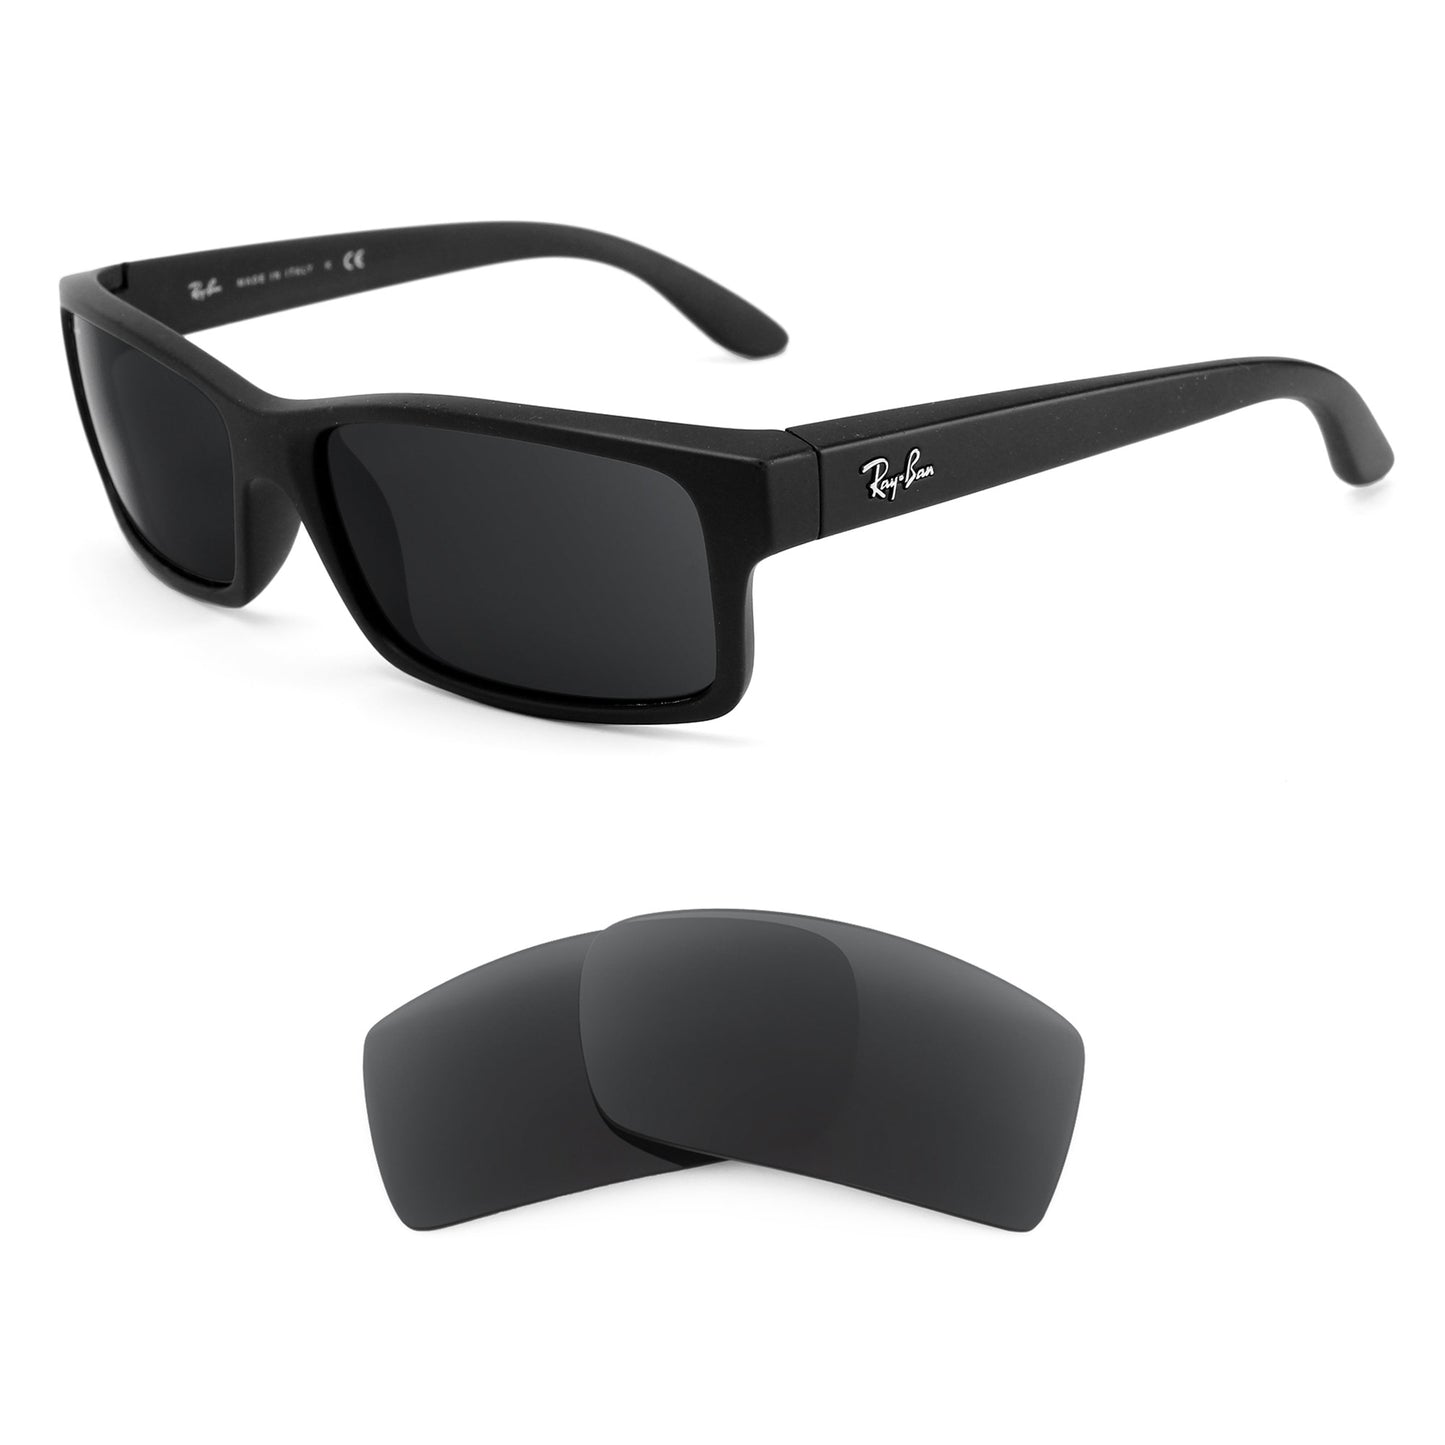 Ray-Ban RB4151 59mm sunglasses with replacement lenses